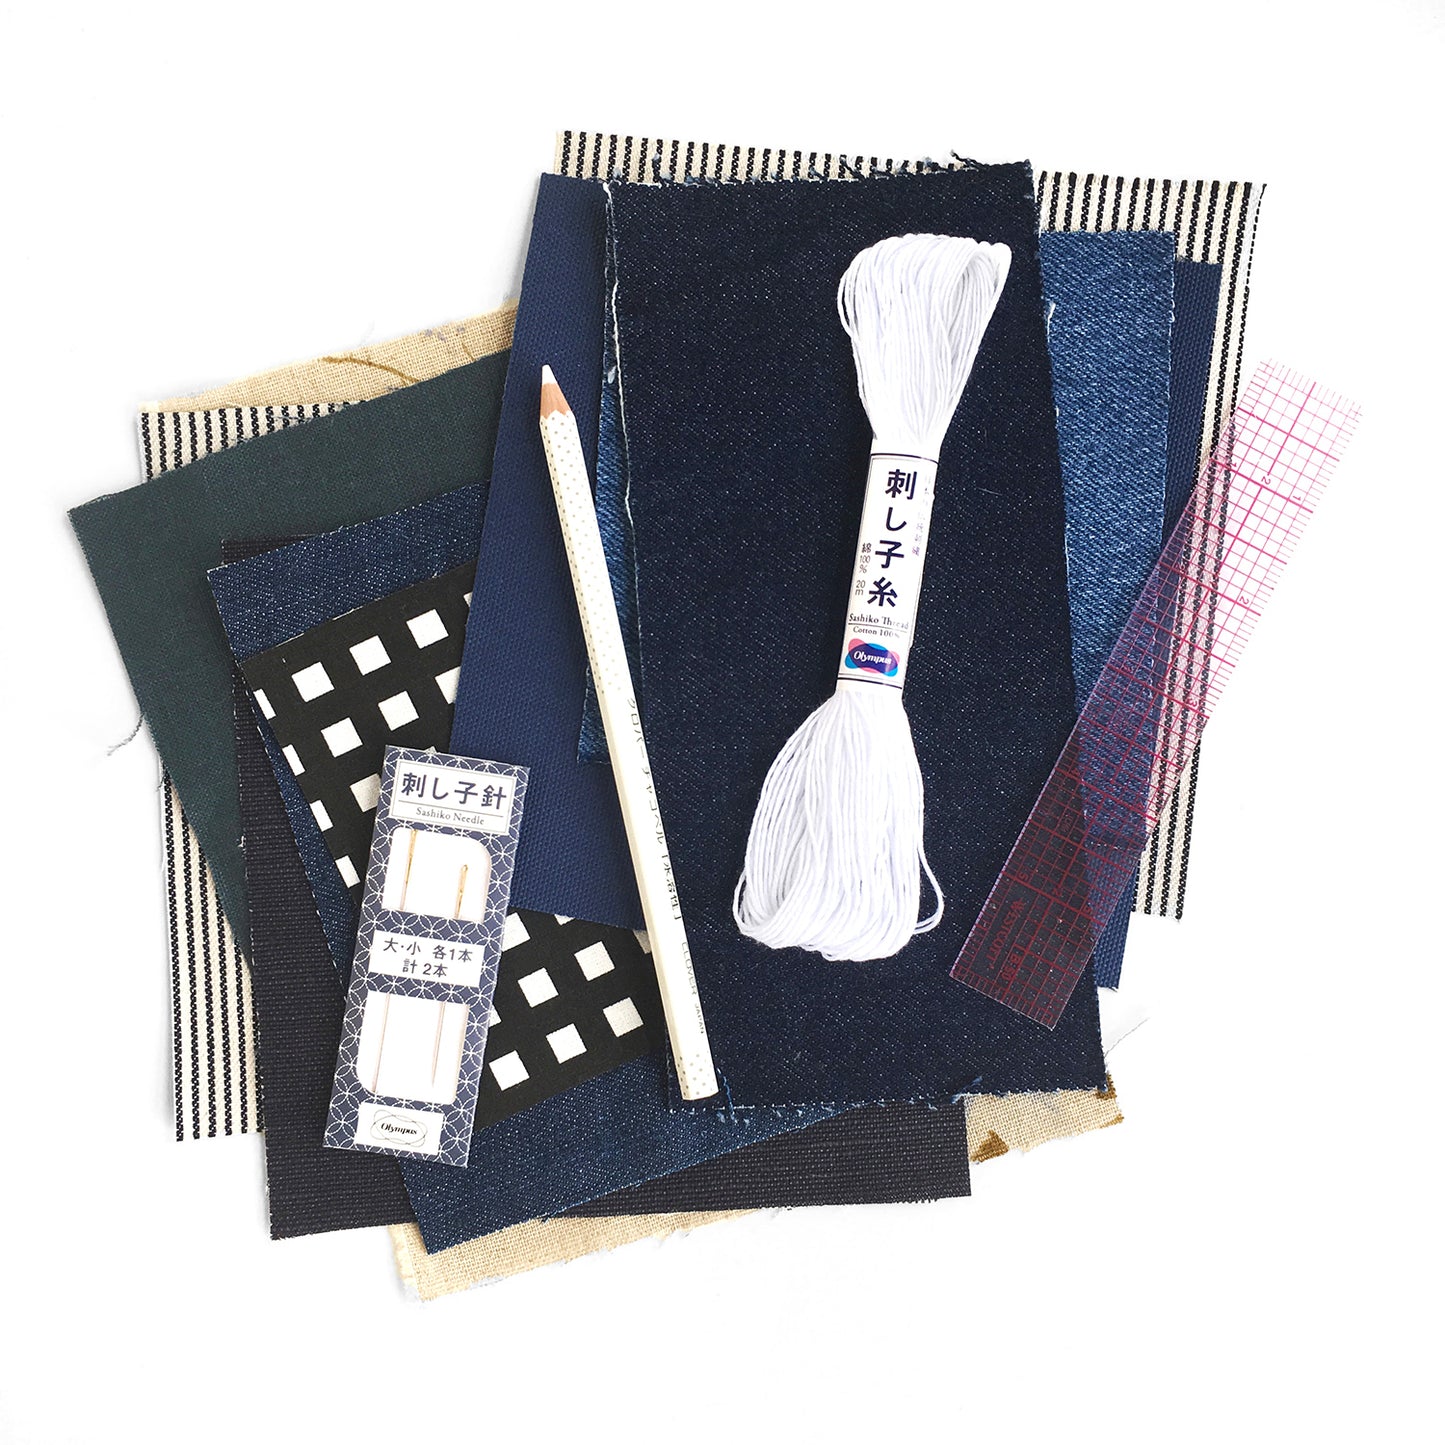 Sashiko Mending Kit -  a DIY guide to decorative, functional patching by hand